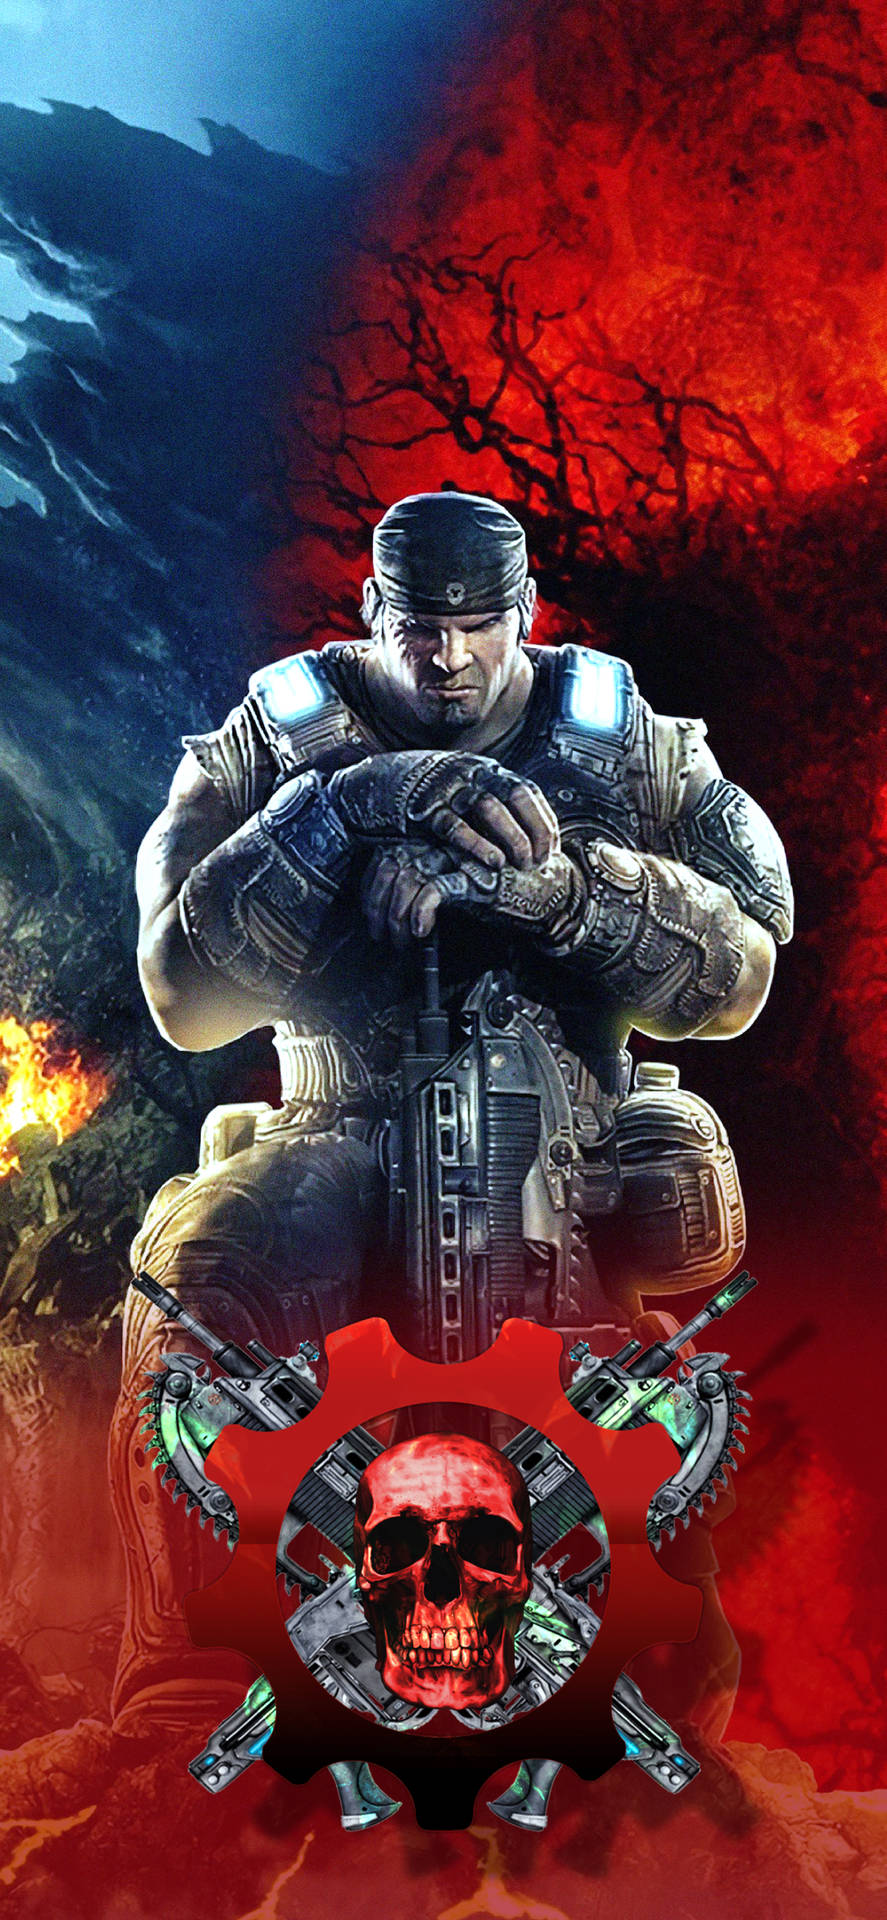 Victorious Marcus Fenix Gears 5 Iphone Background